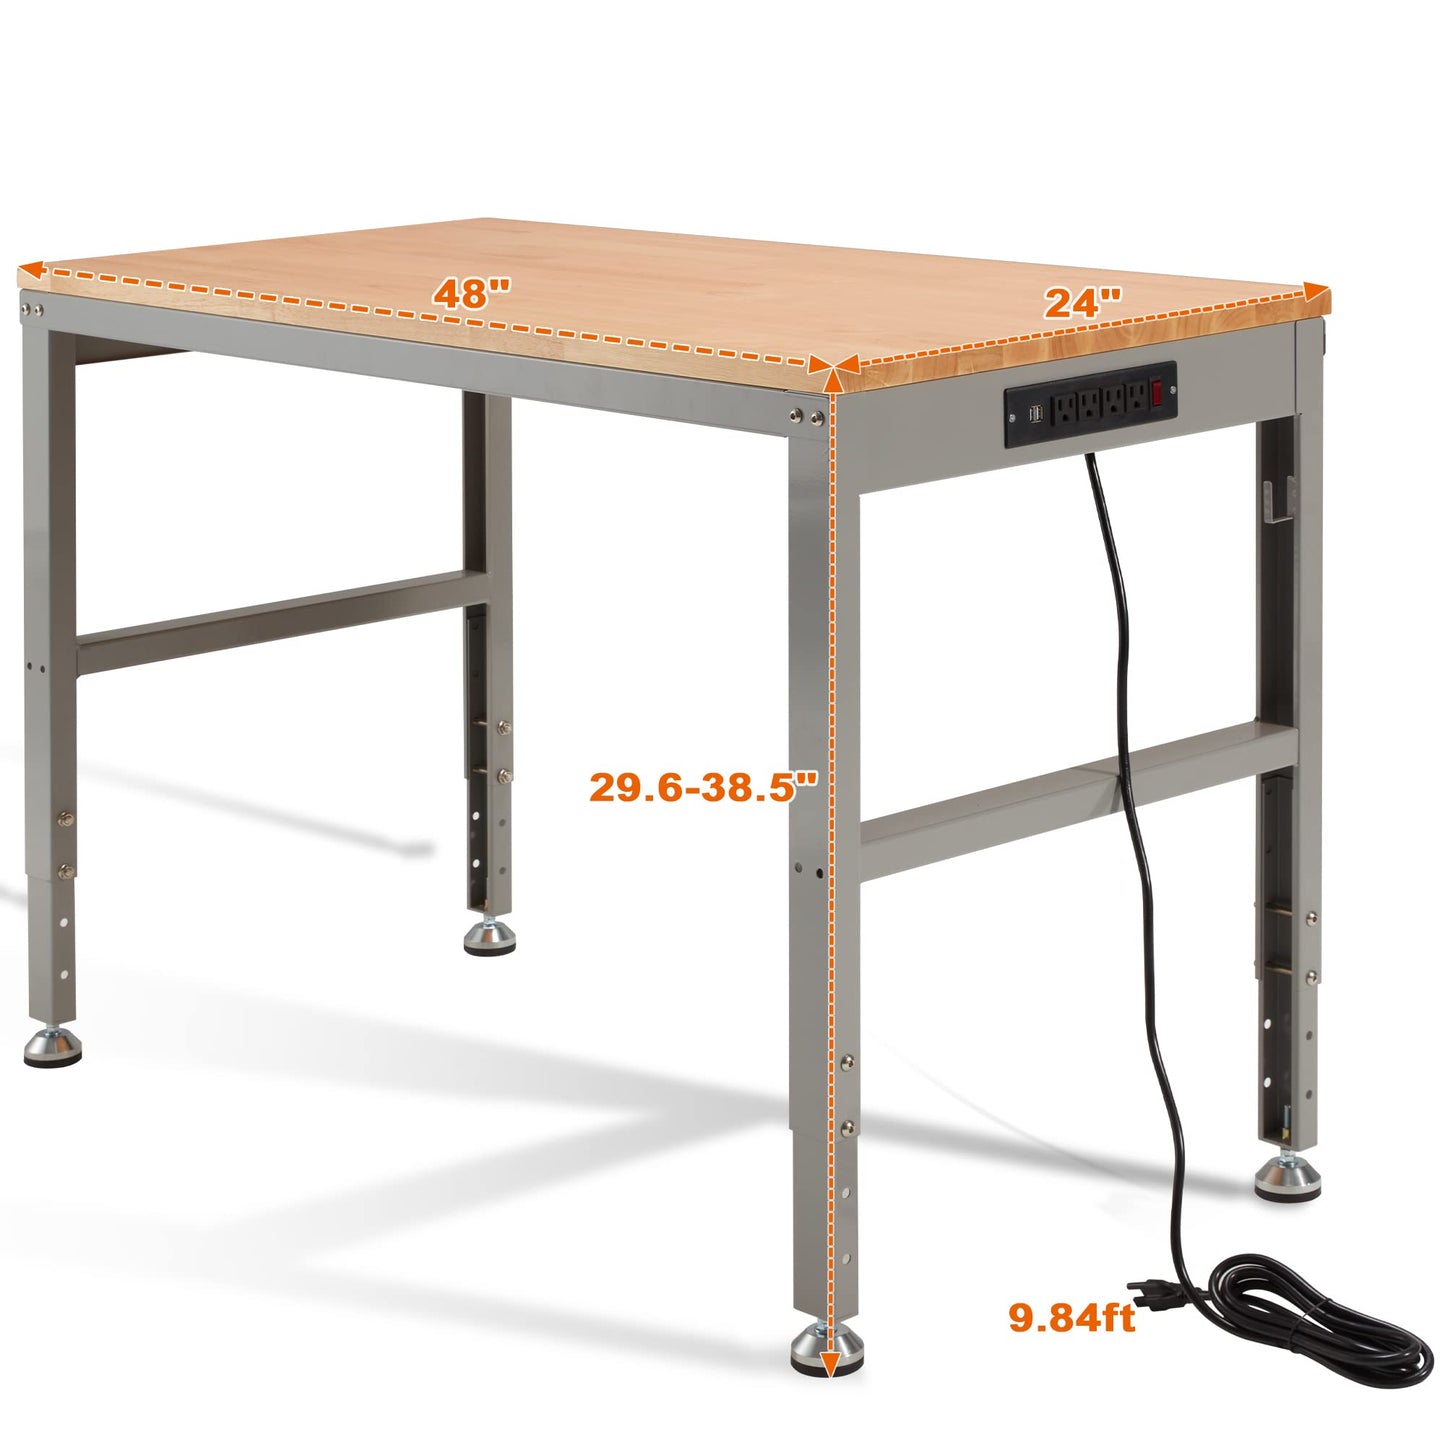 Haddockway Adjustable Workbench for Garage, 48"x 24" Rubber Wood Top Work Bench with Power Outlets, Max 2000 Lbs Load Capacity Heavy Duty Workstation